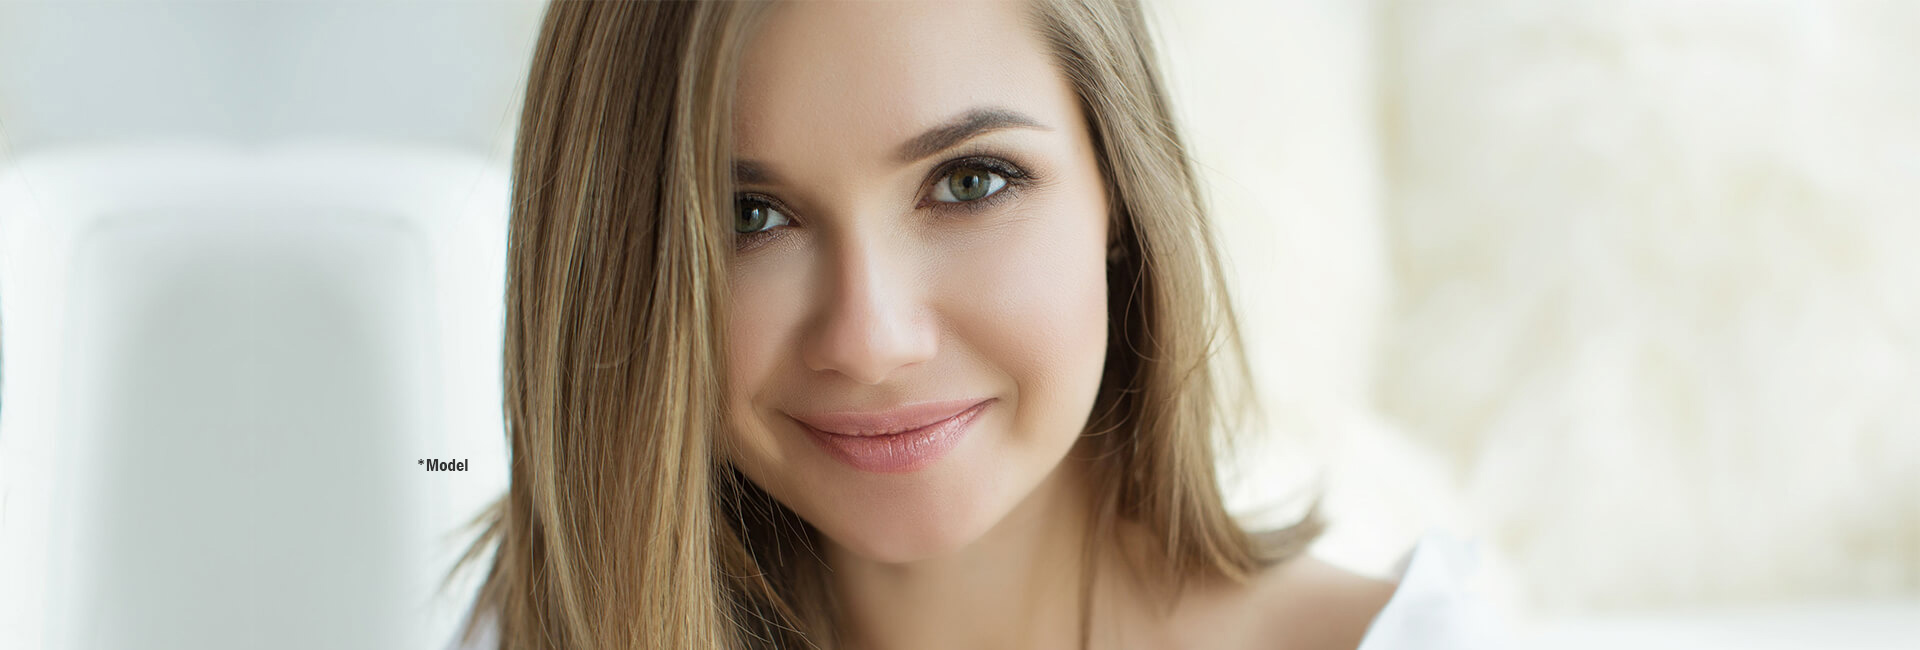 The Aging Nose job beverly hills : A Comprehensive Guide to Preserving Youthful Appearance